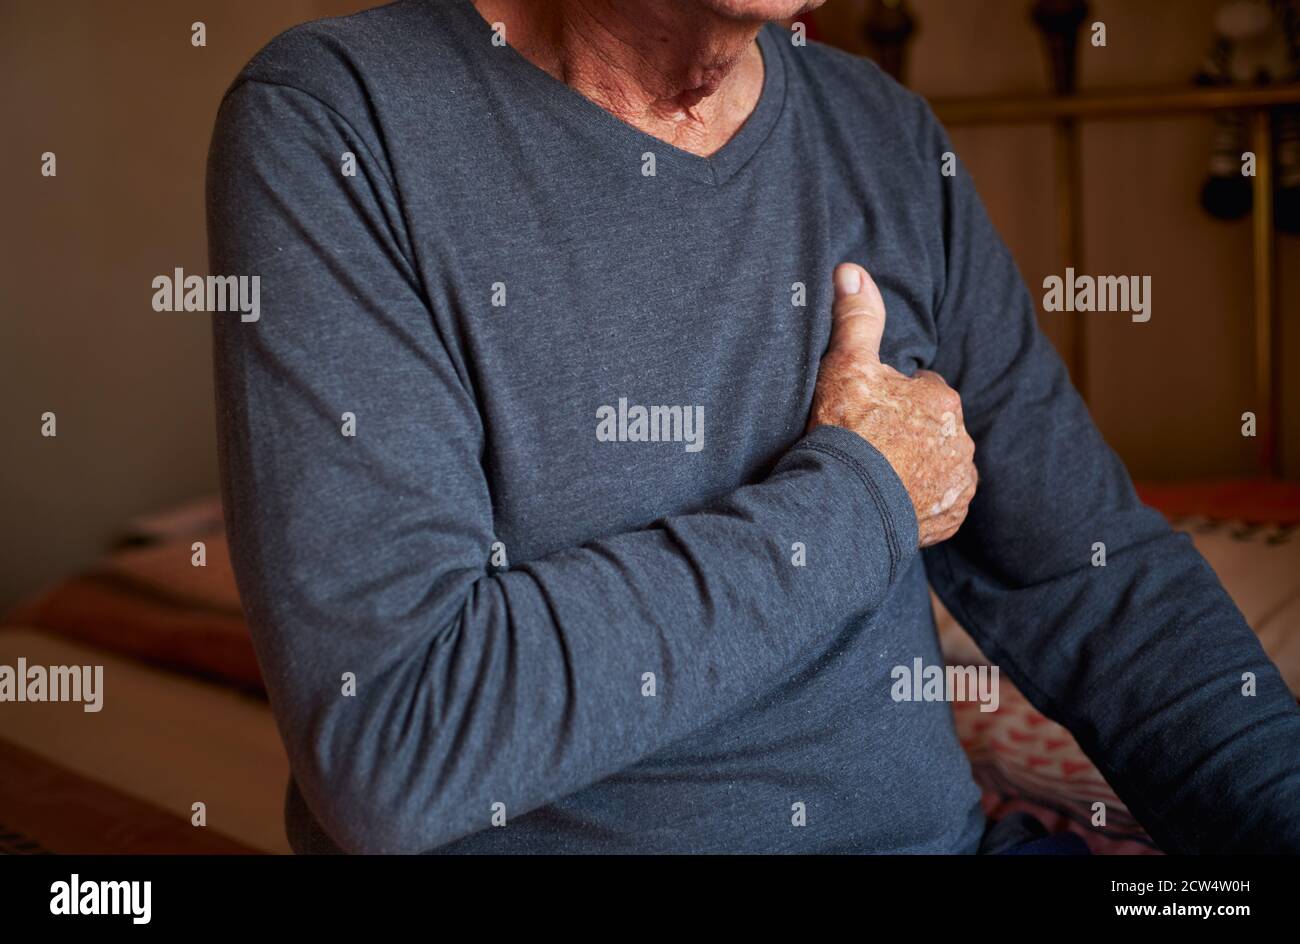 Close Up Of Senior Man With Health Issues At Home Clutching Chest In Pain Stock Photo